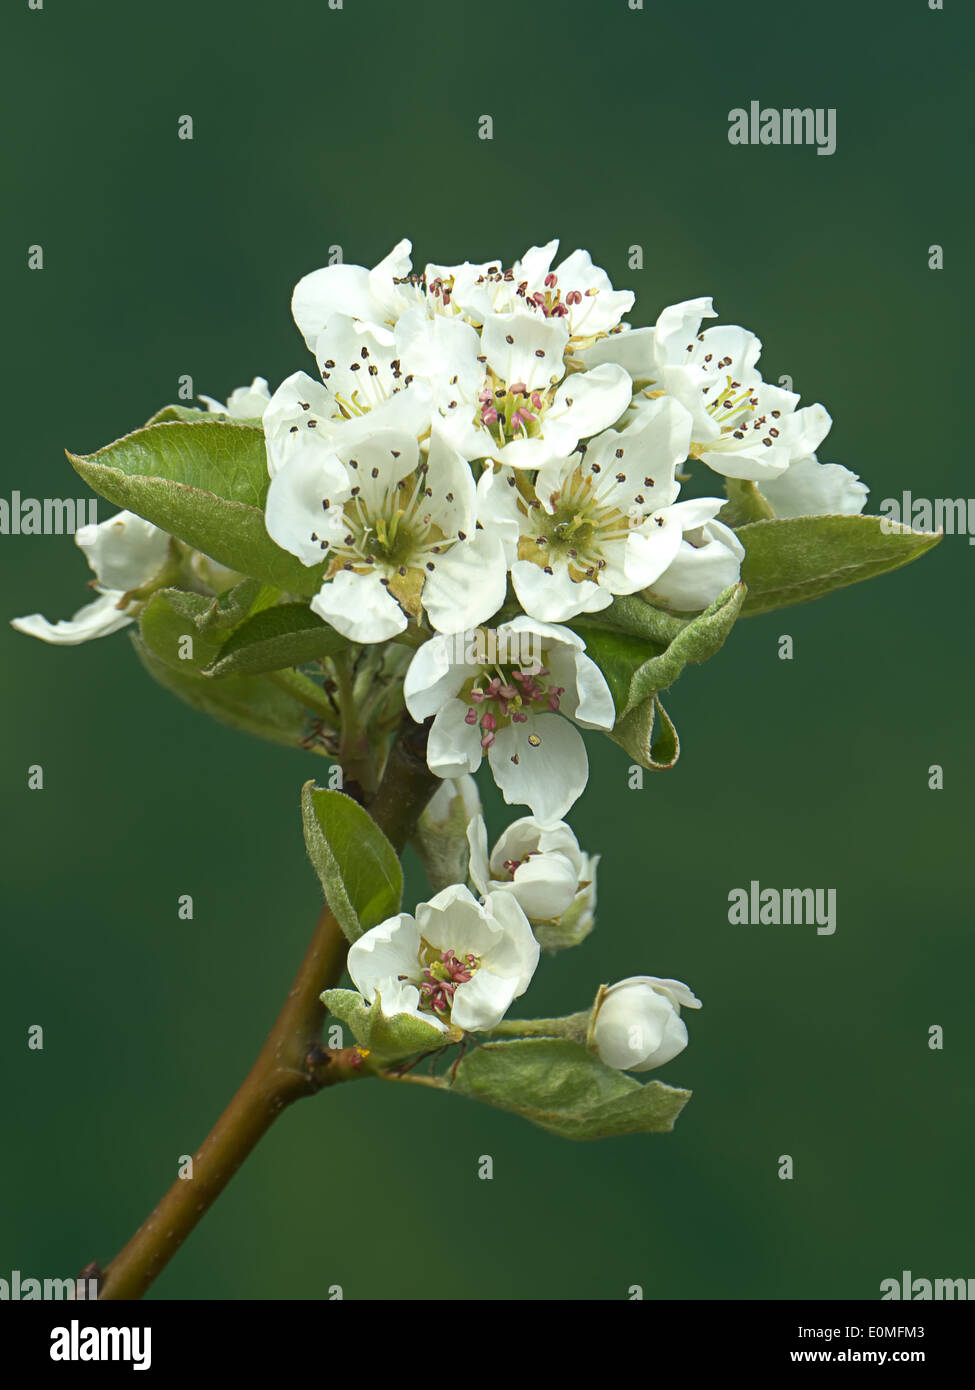 Closeup of pear tree with blooming flowers Stock Photo